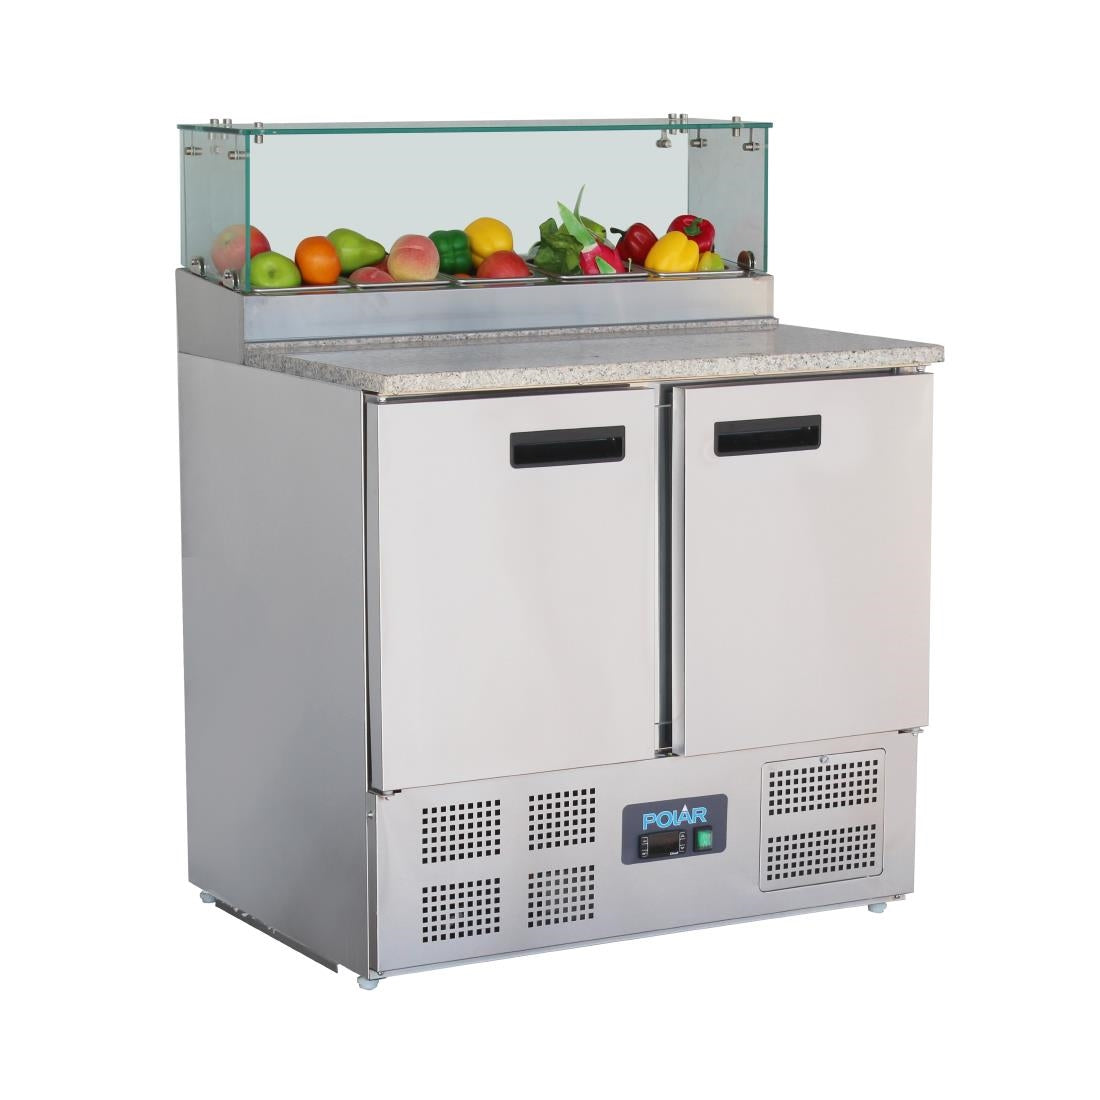 GH266 Polar G-Series 2 Door Pizza Prep Counter with Glass Sneeze Guard 256Ltr JD Catering Equipment Solutions Ltd